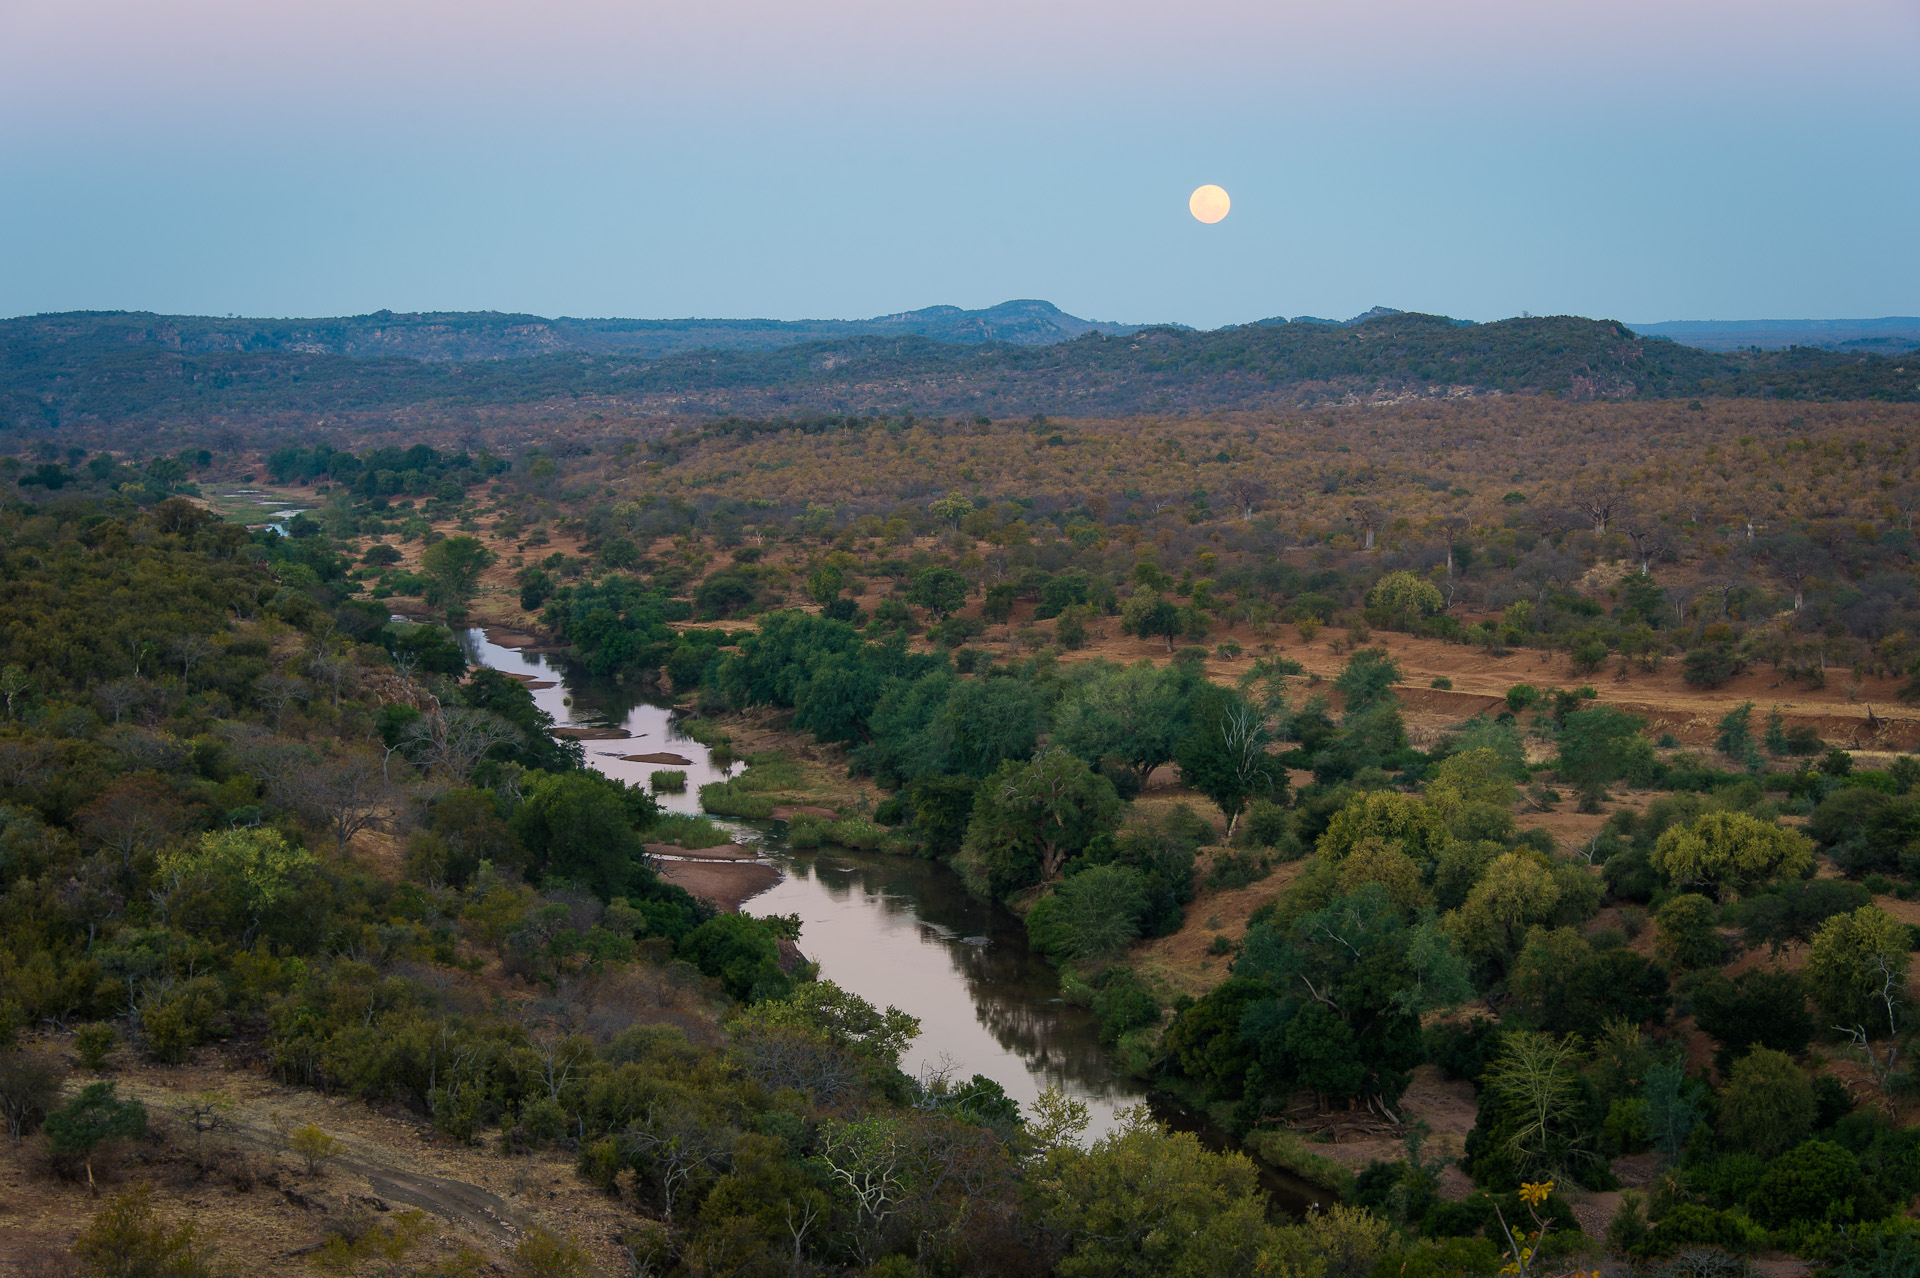 WHAT TO EXPECT IN KRUGER THIS WINTER